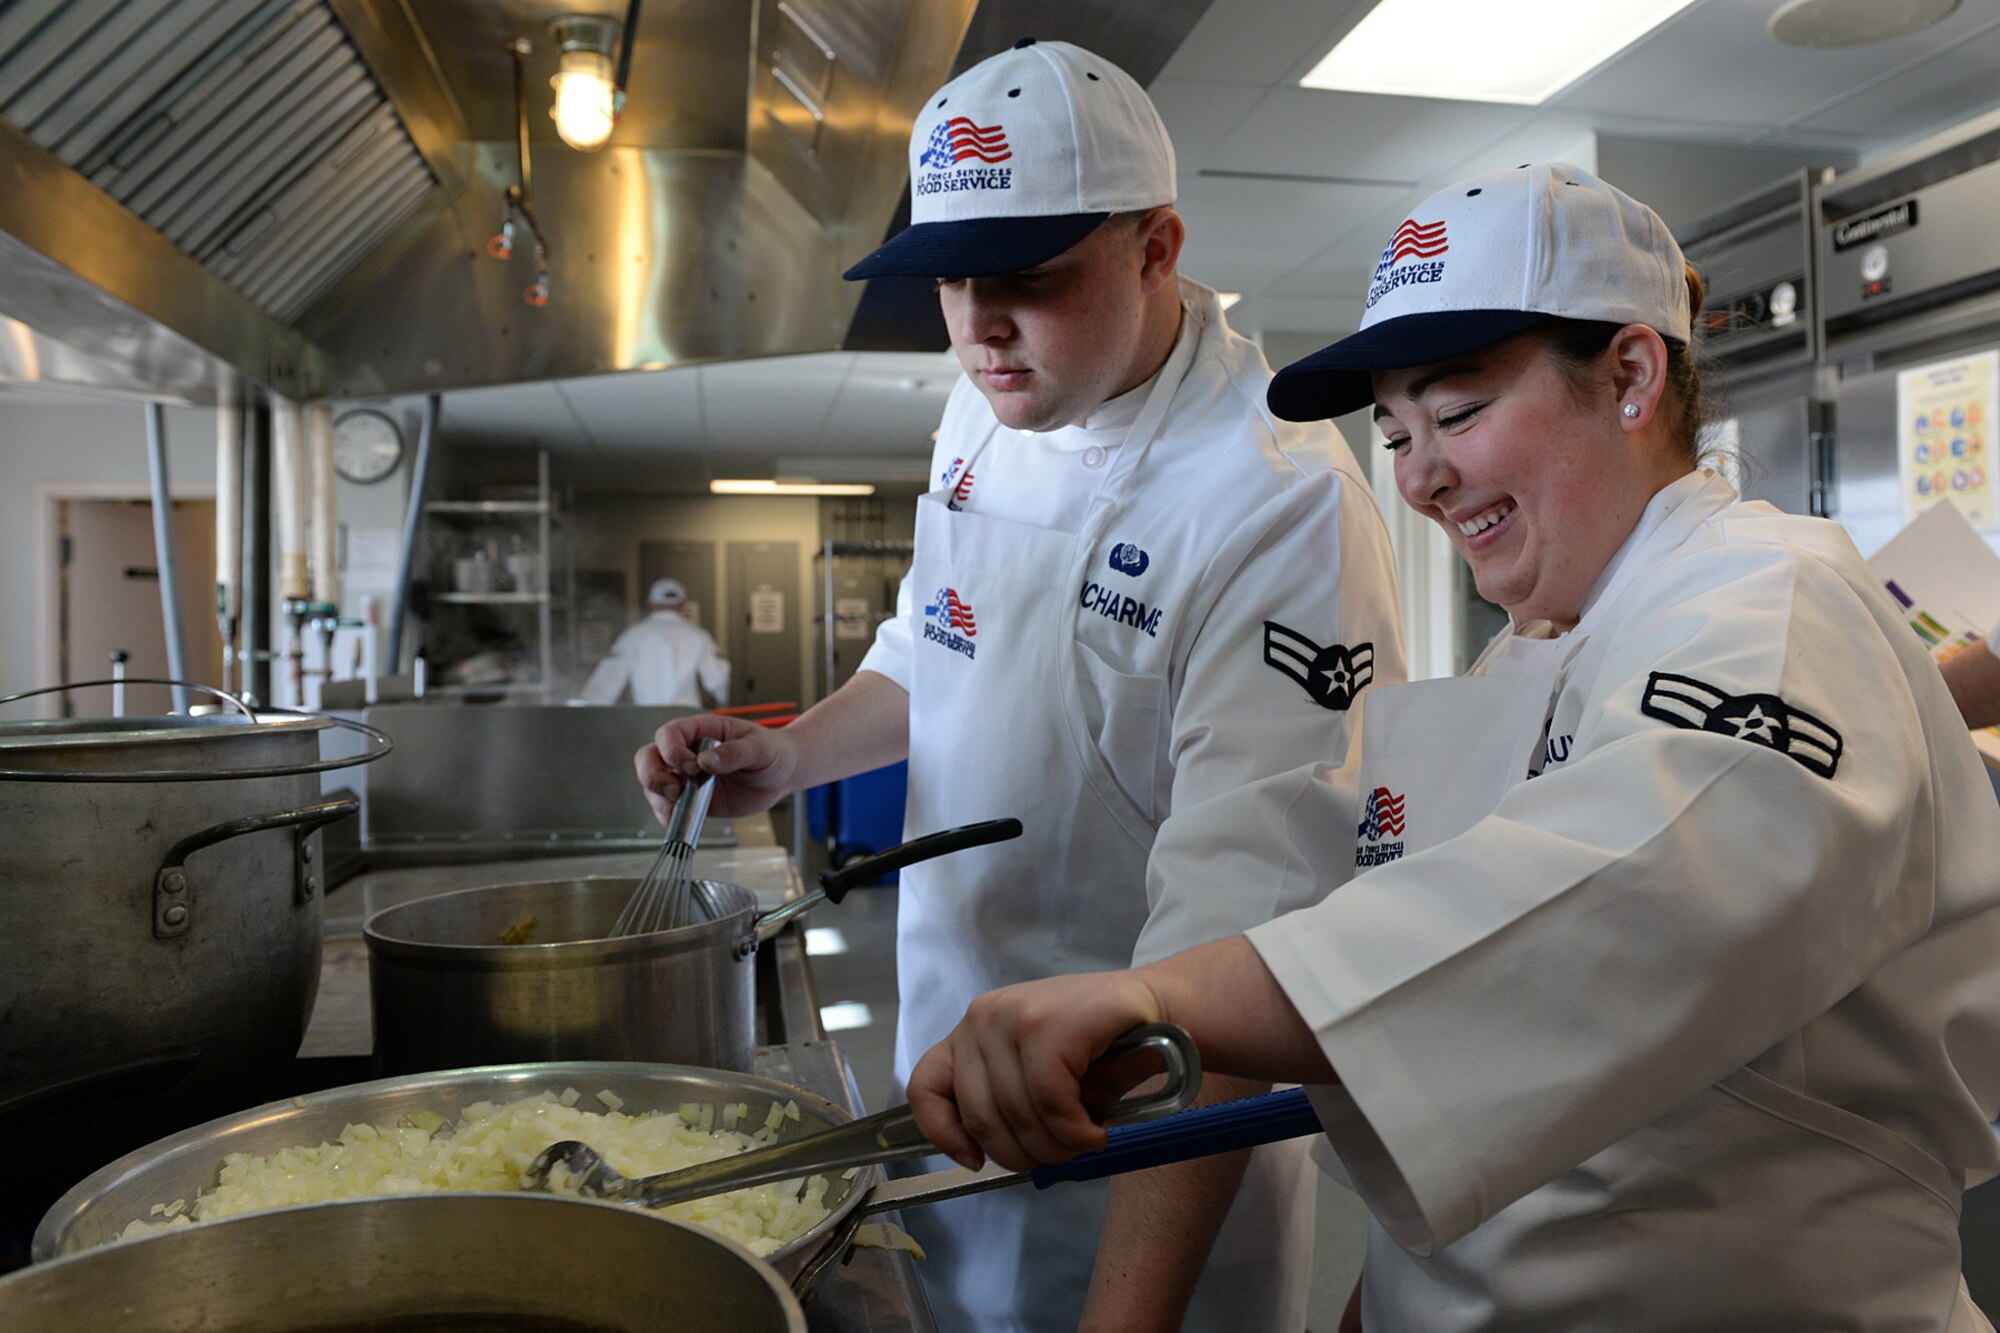 Airman 1st Class Ryan Ducharme and Airman 1st Class Jordyn Descoteaux, members of the 157th Force Support Squadron Services Flight, prepare lunch during the April Unit Training Assembly in the kitchen of the Aerospace Dining Facility April 11. The 157 FSS team has been selected as one of the top three Air National Guard food services operations in the nation. Entering its 15th year, the Senior Master Sergeant Kenneth  Disney Award has been established to improve food service throughout the Air National Guard, increase morale, encourage competition, recognize excellence and honor the late Disney. Disney was the services superintendent at McGee Tyson Air Base, Tenn., for more than 20-years where he earned a reputation for commitment to providing outstanding food service. (N.H. Air National Guard photo by Senior Airman Kayla McWalter)